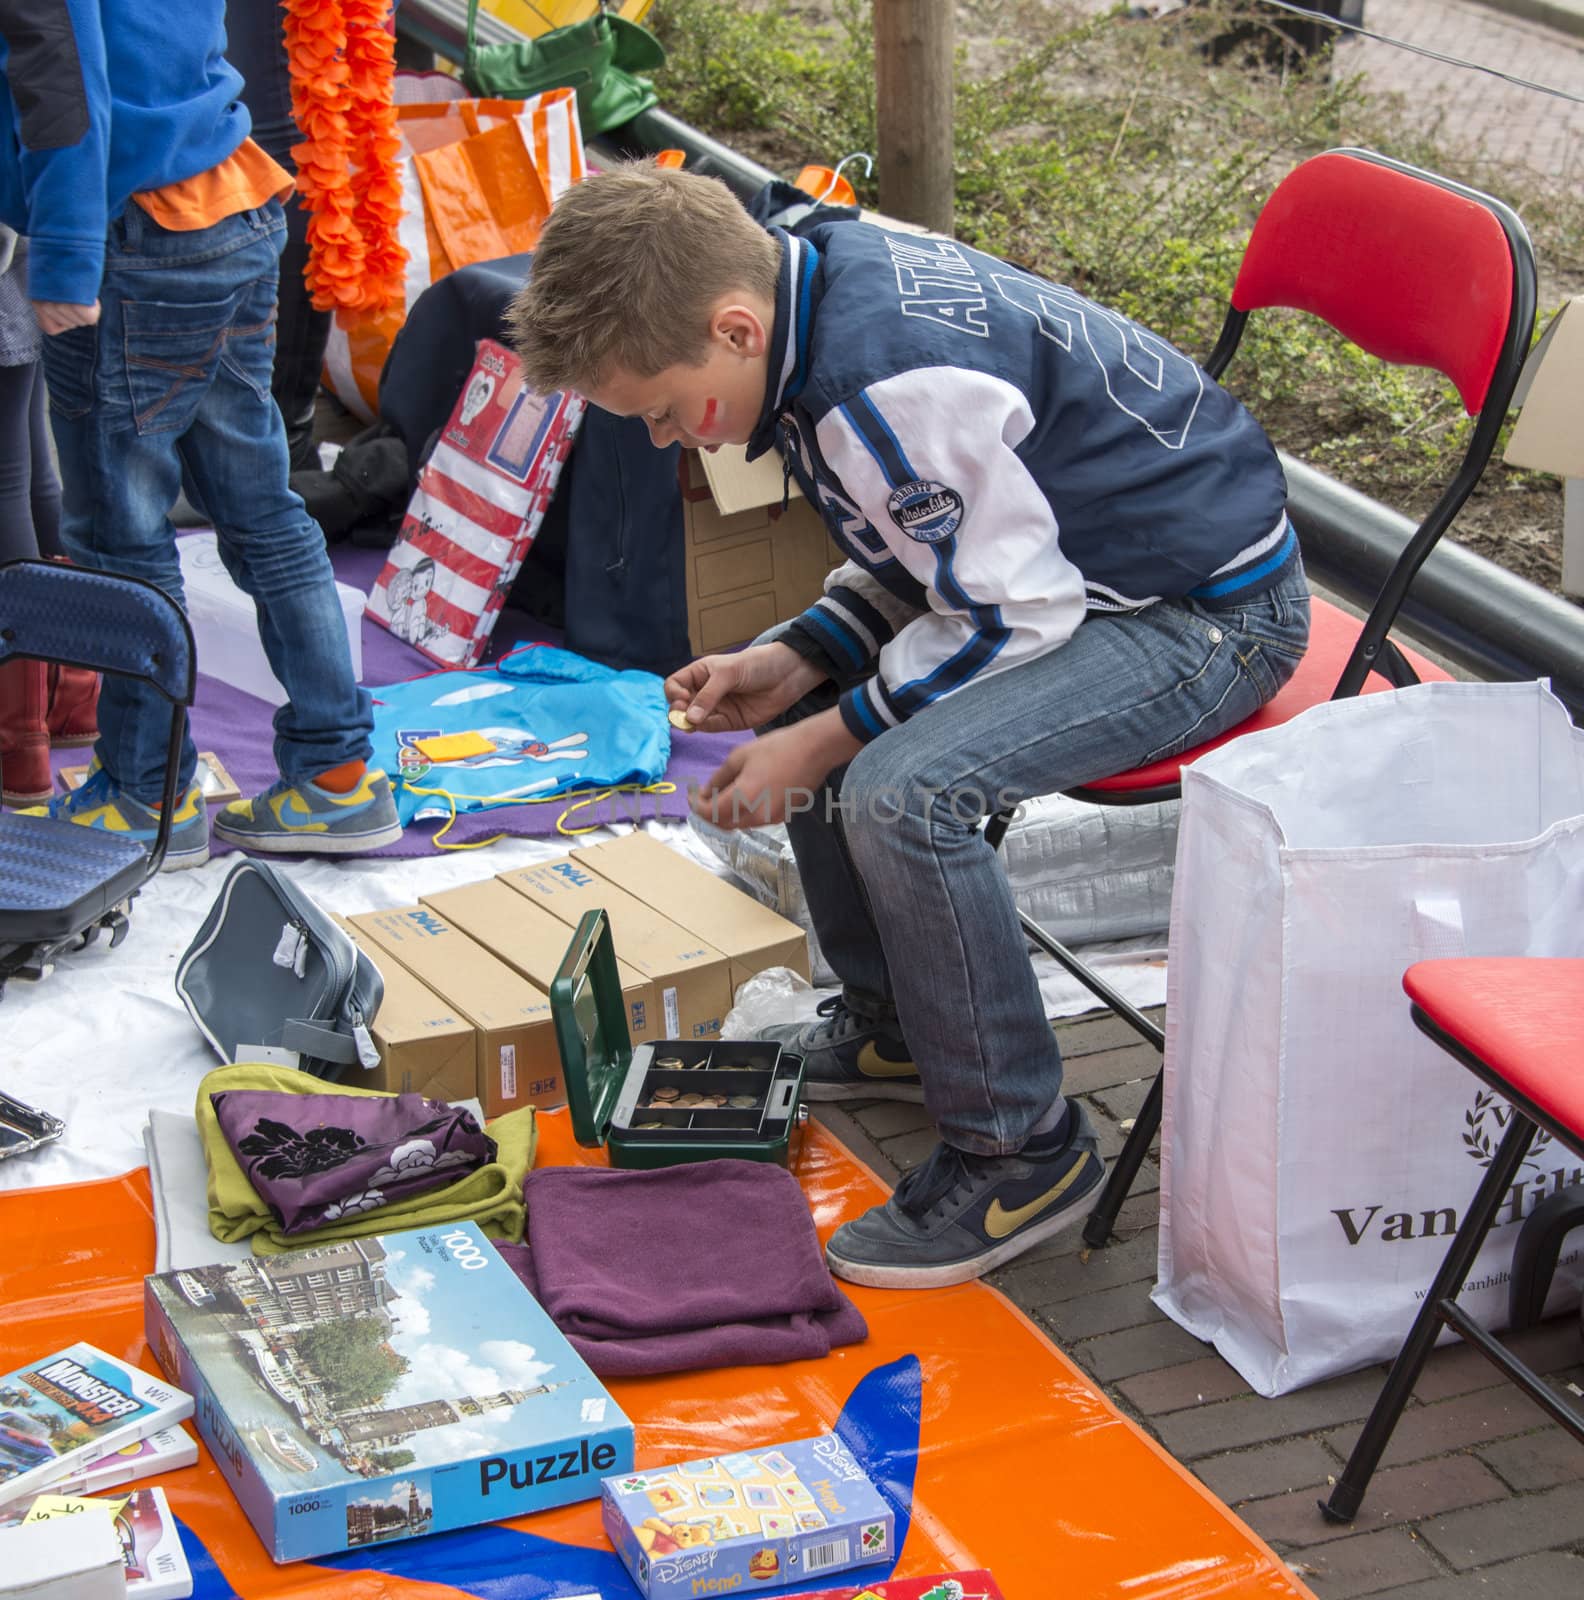 MELISSANT,HOLLAND - APRIL 30 unidentified boy countinh his money earned from sale on the market on queensday on April 30, 2013 in Melissant, The Netherlands,this market is once a year with queensday